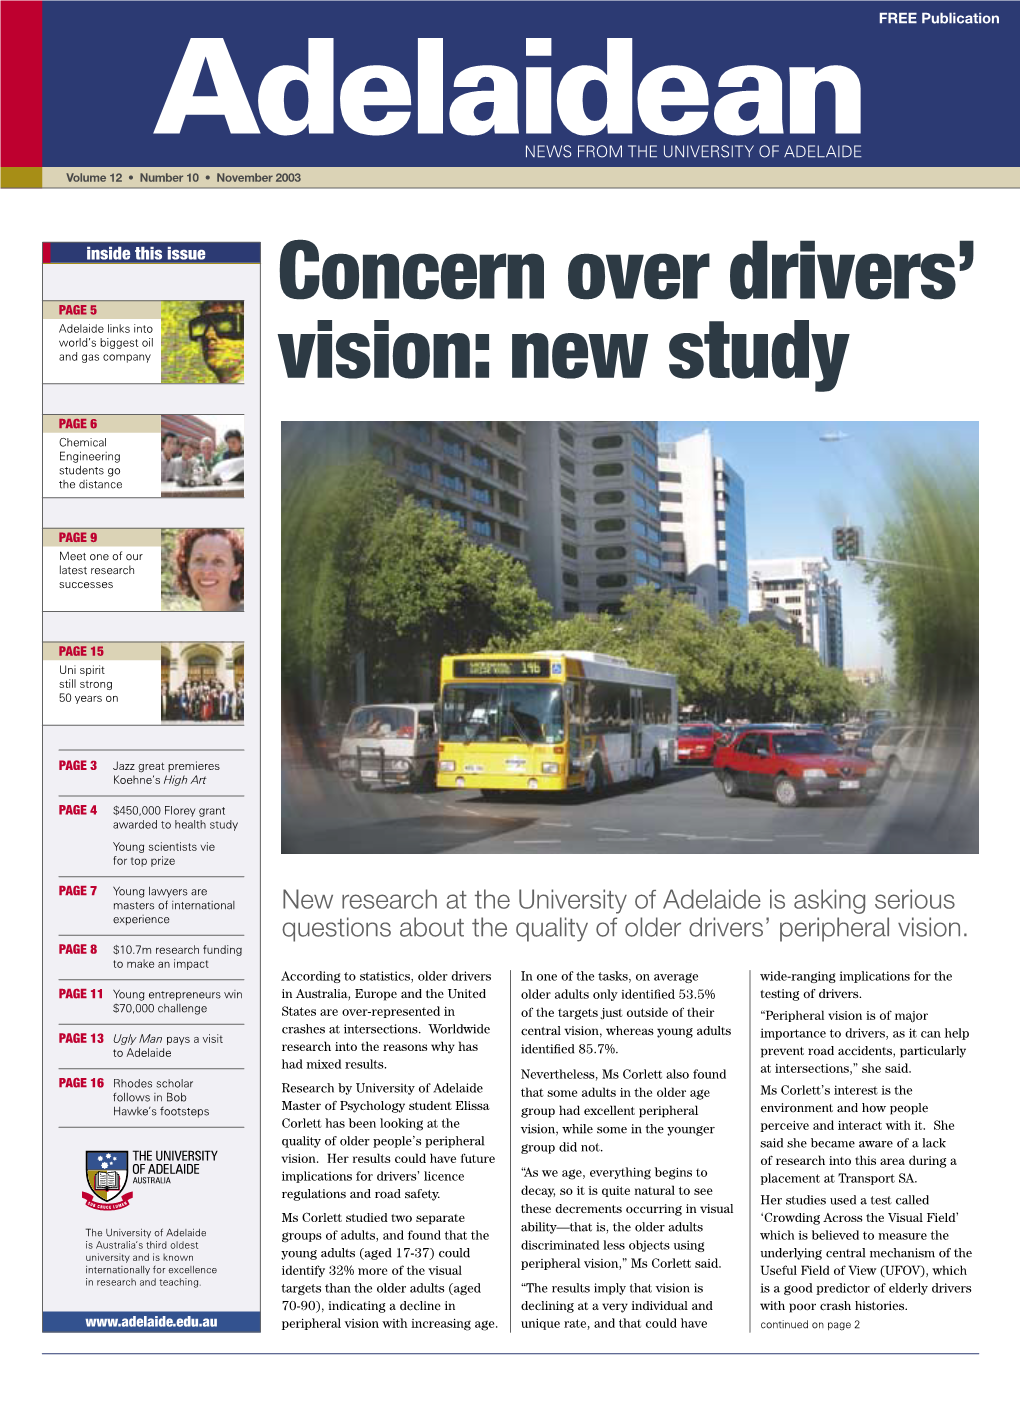 Concern Over Drivers' Vision: New Study